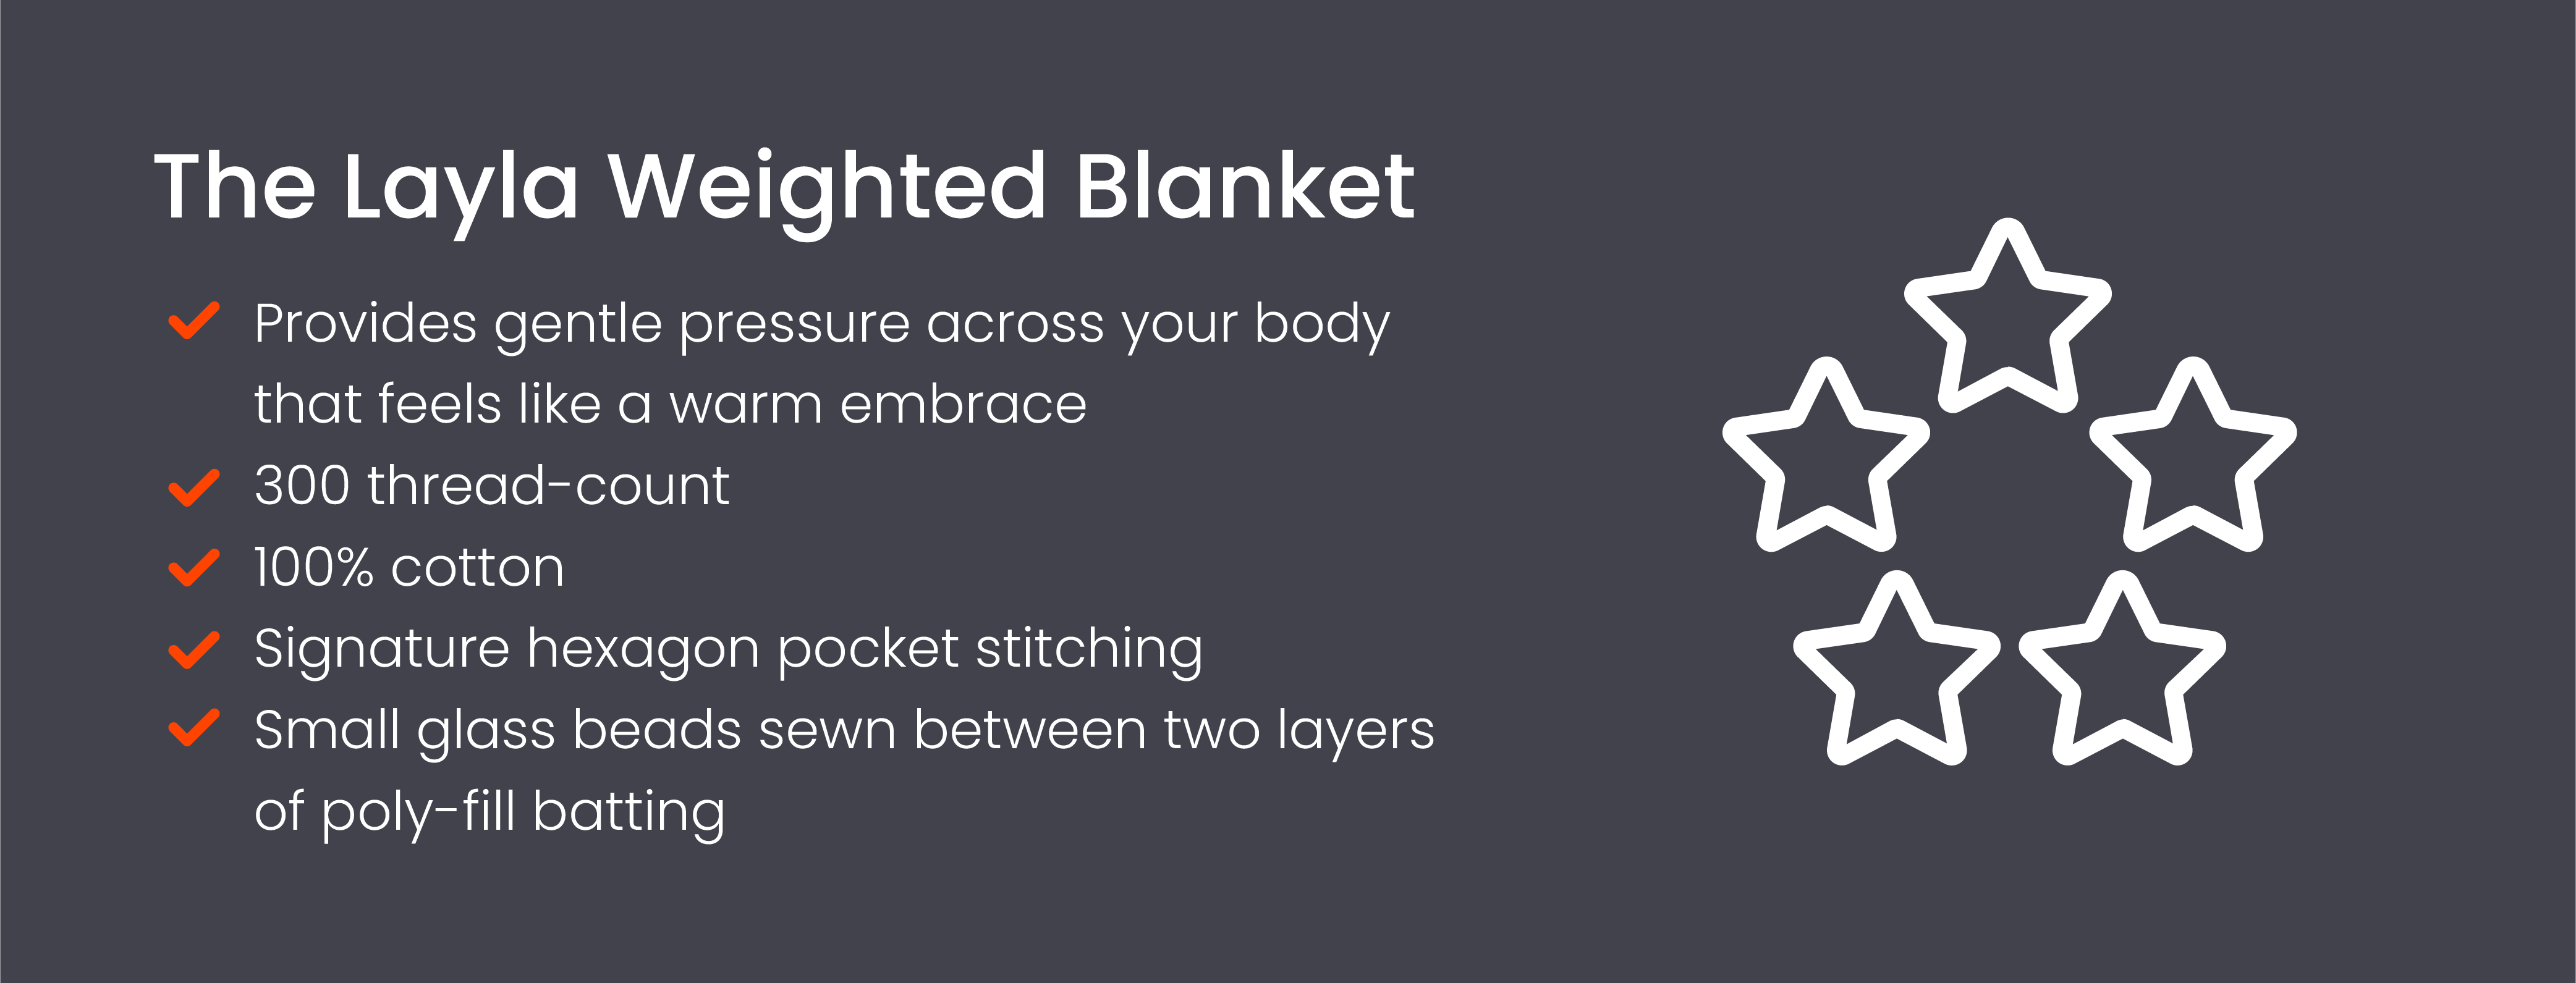 Description of the Layla weighted blanket